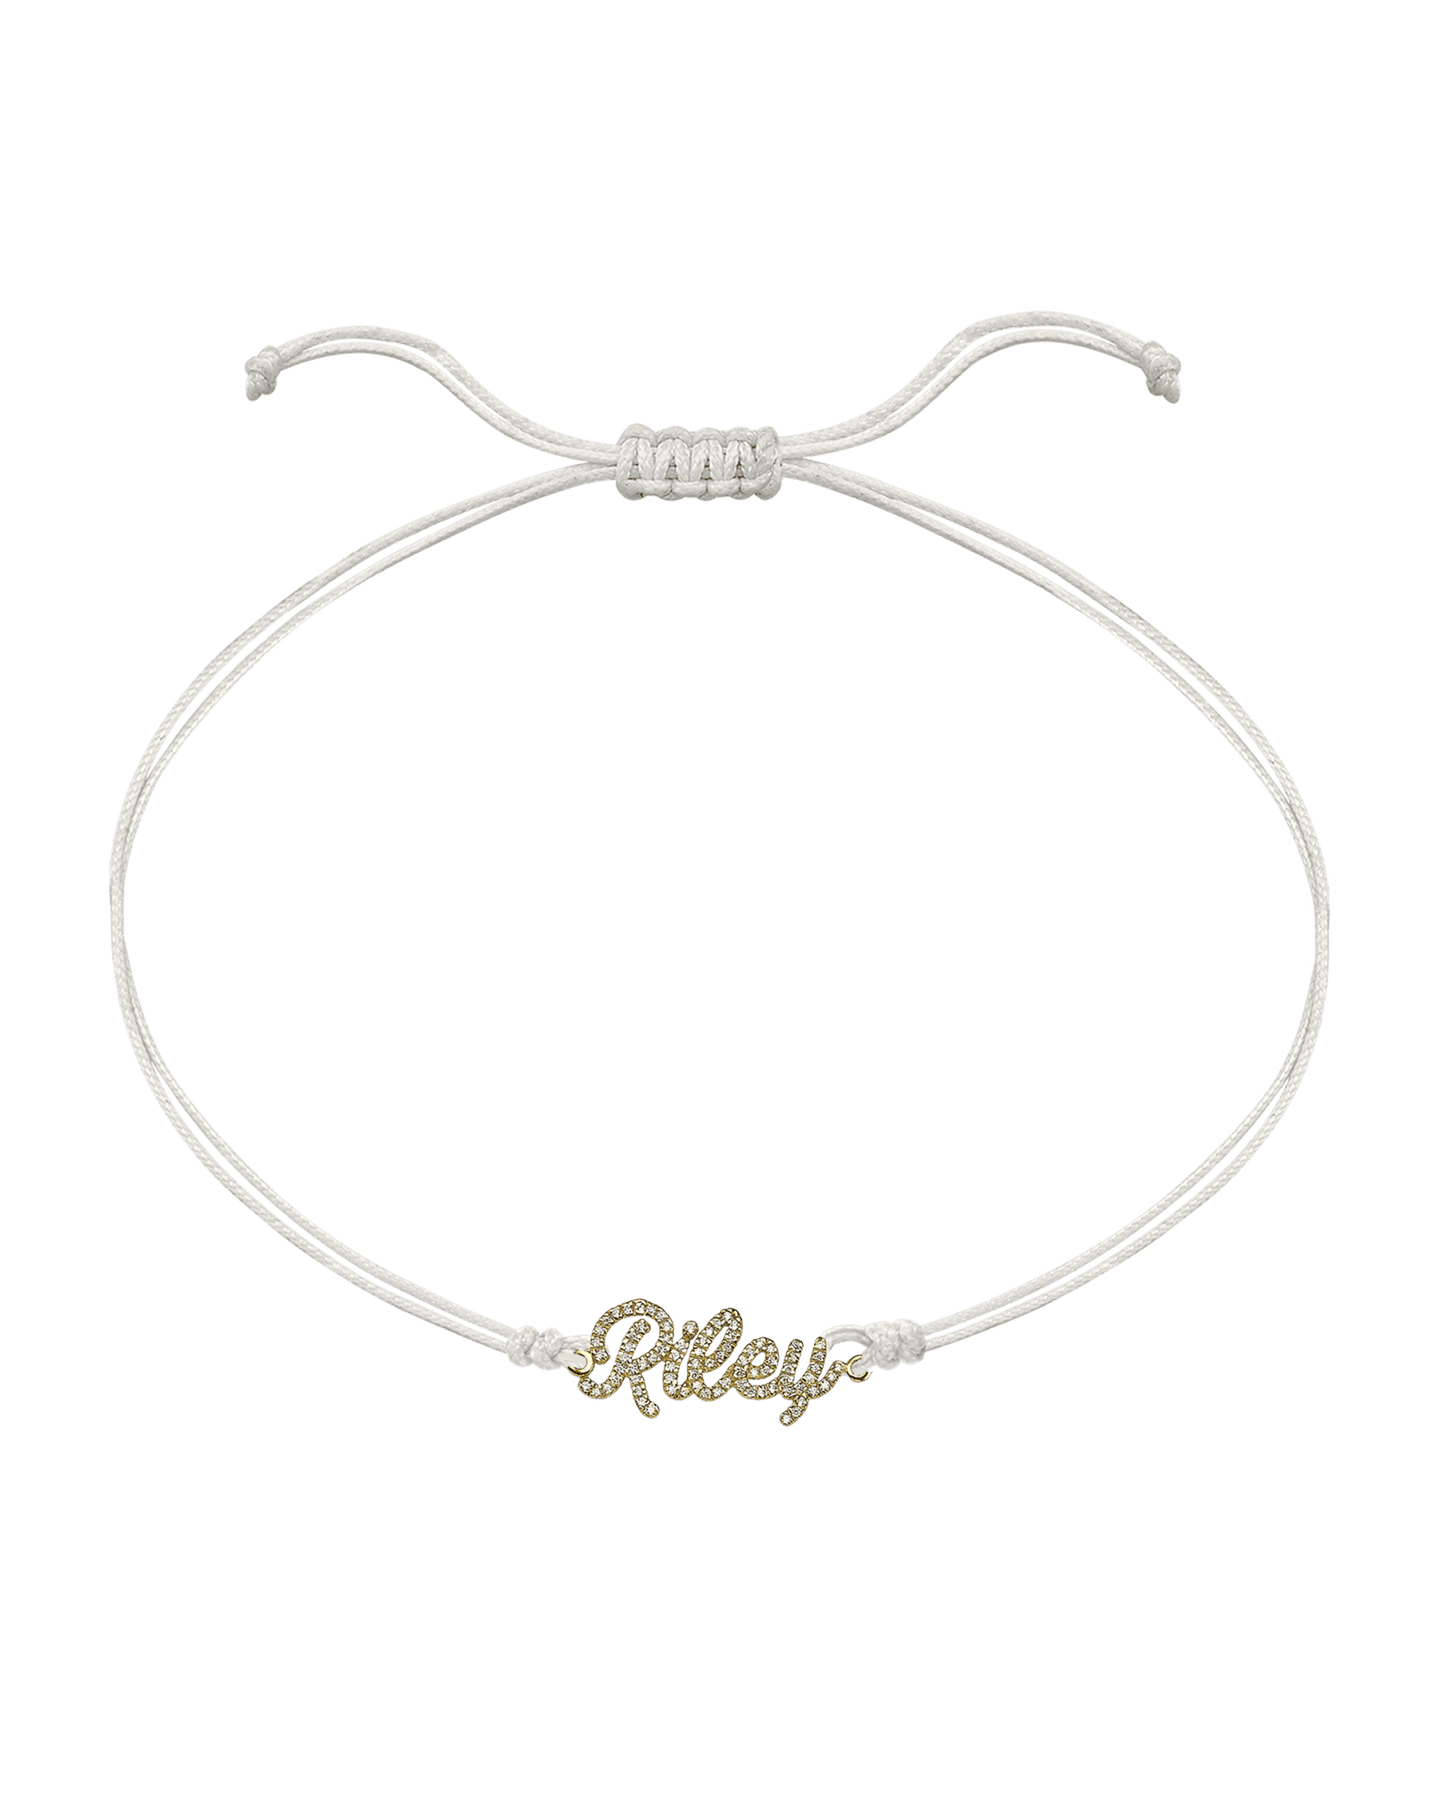 Paved Name Plate String of Love - 14K Yellow Gold Bracelet 14K Solid Gold Pearl 1 